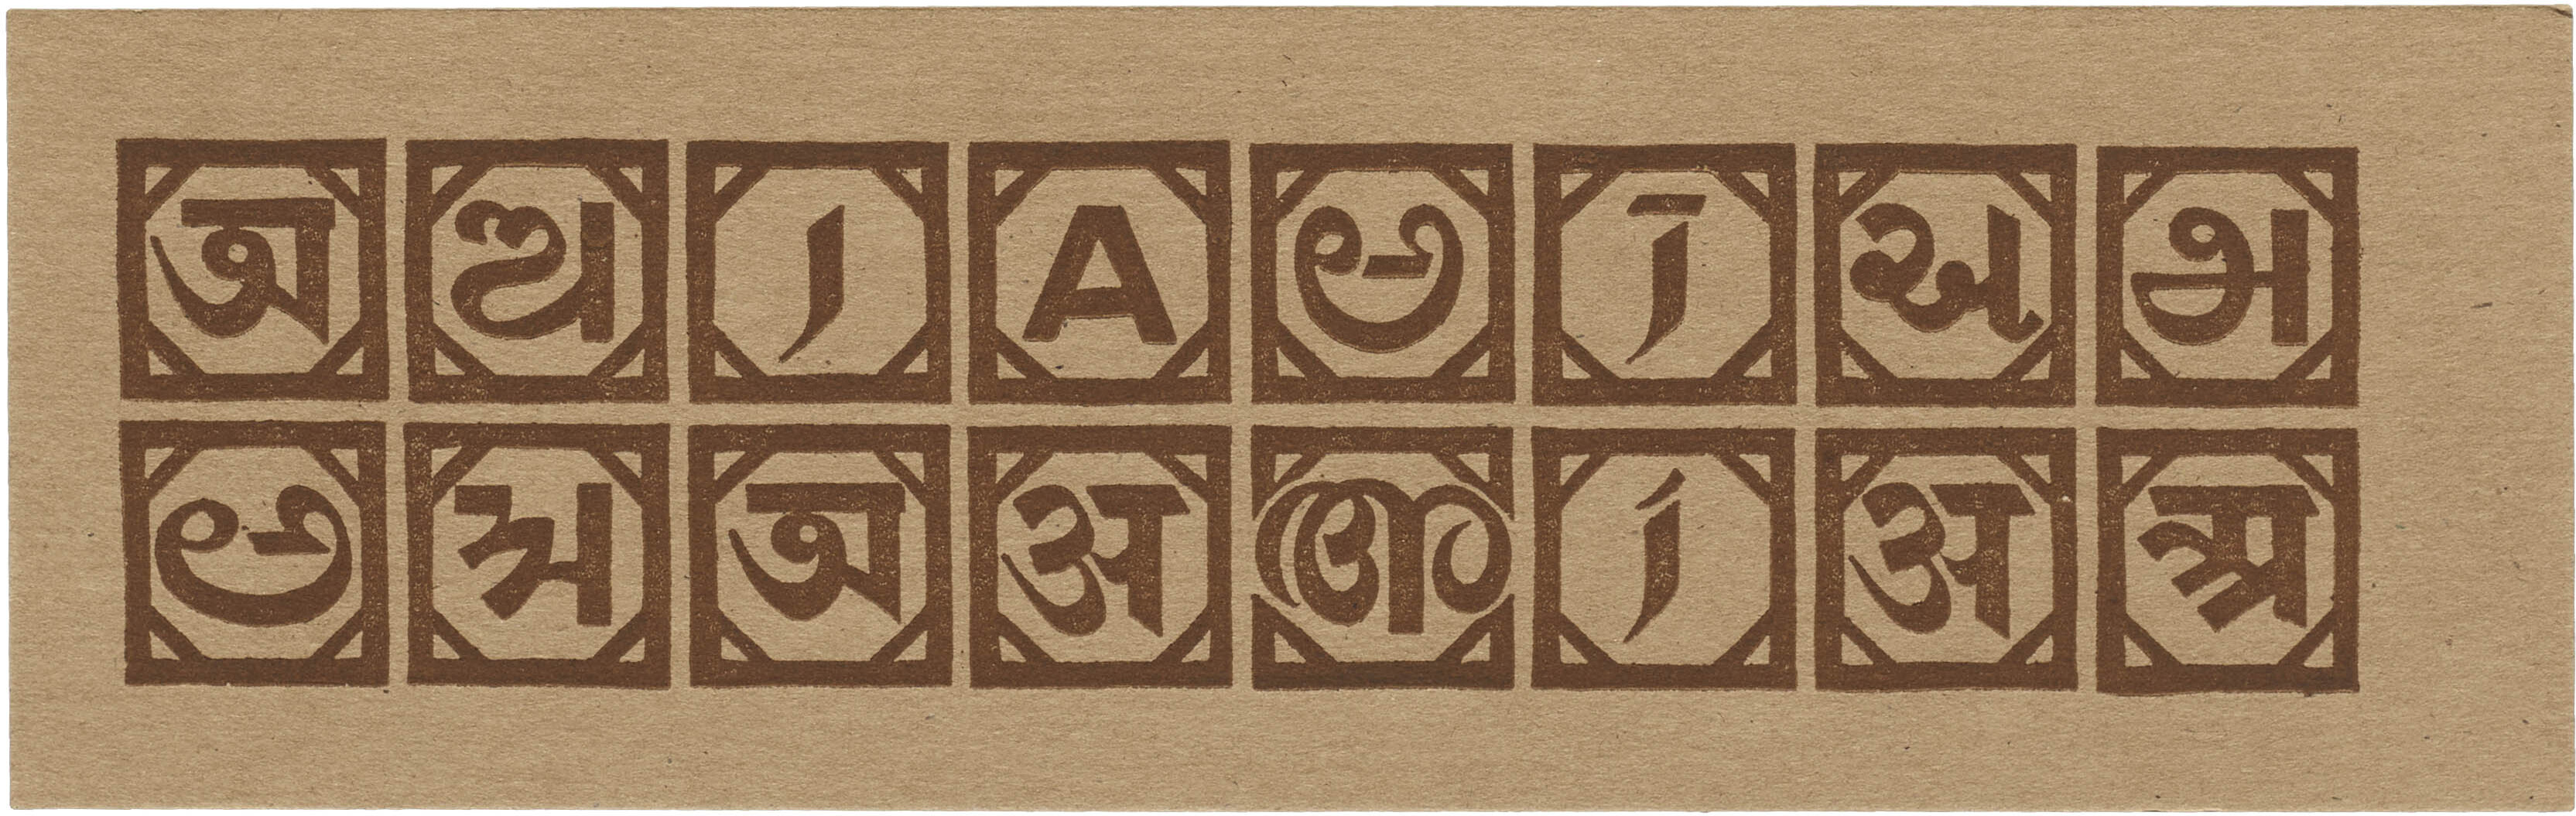 Reverse side of label that reuses the design from the inside cover featuring the vowel “a” from different Indian scripts.